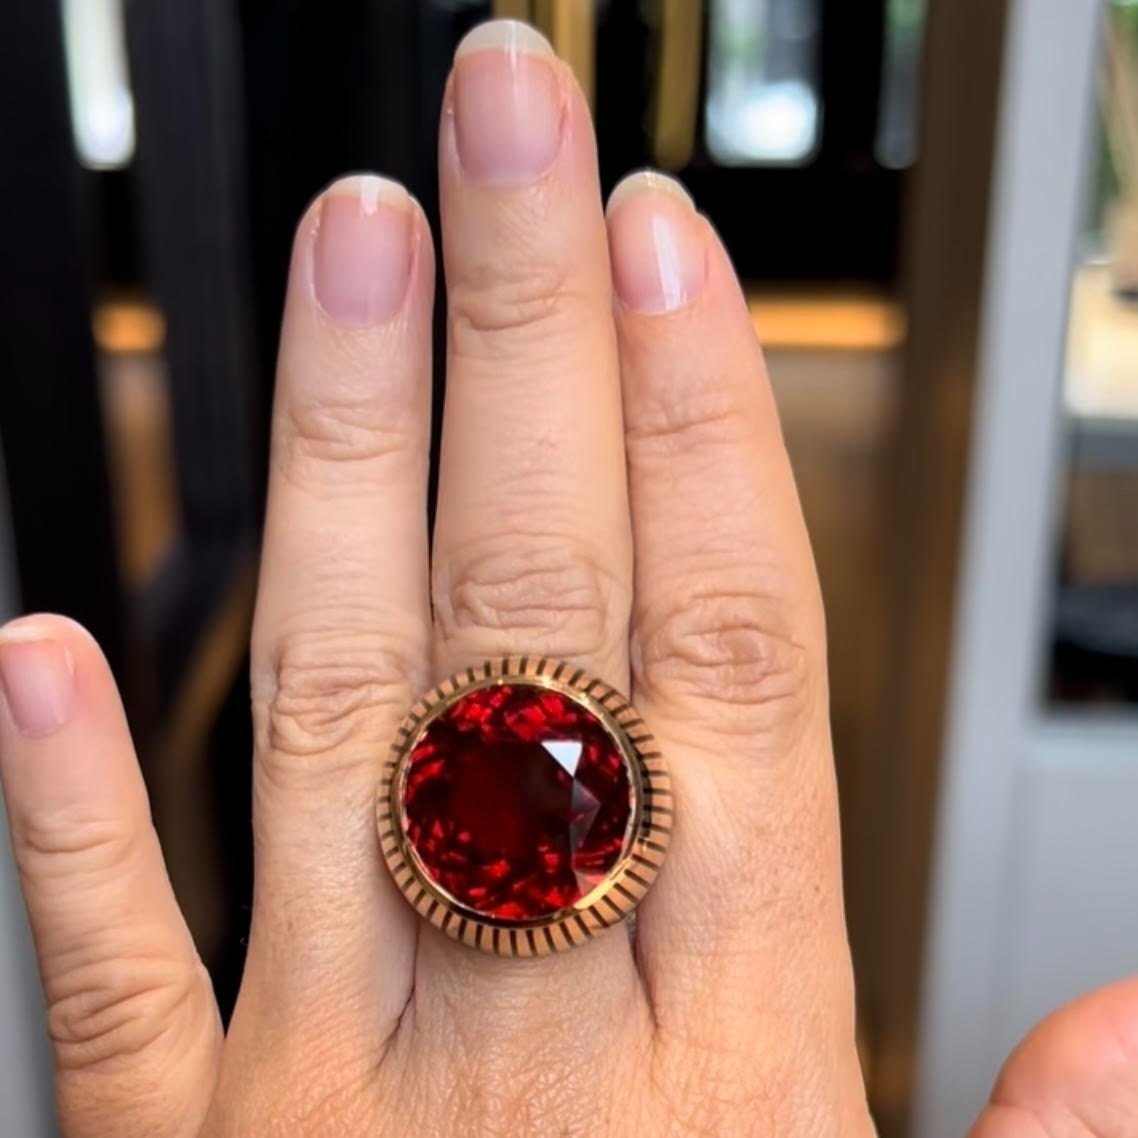 The thing Jodie is coveting next: this Ming Lampson red garnet cocktail ring